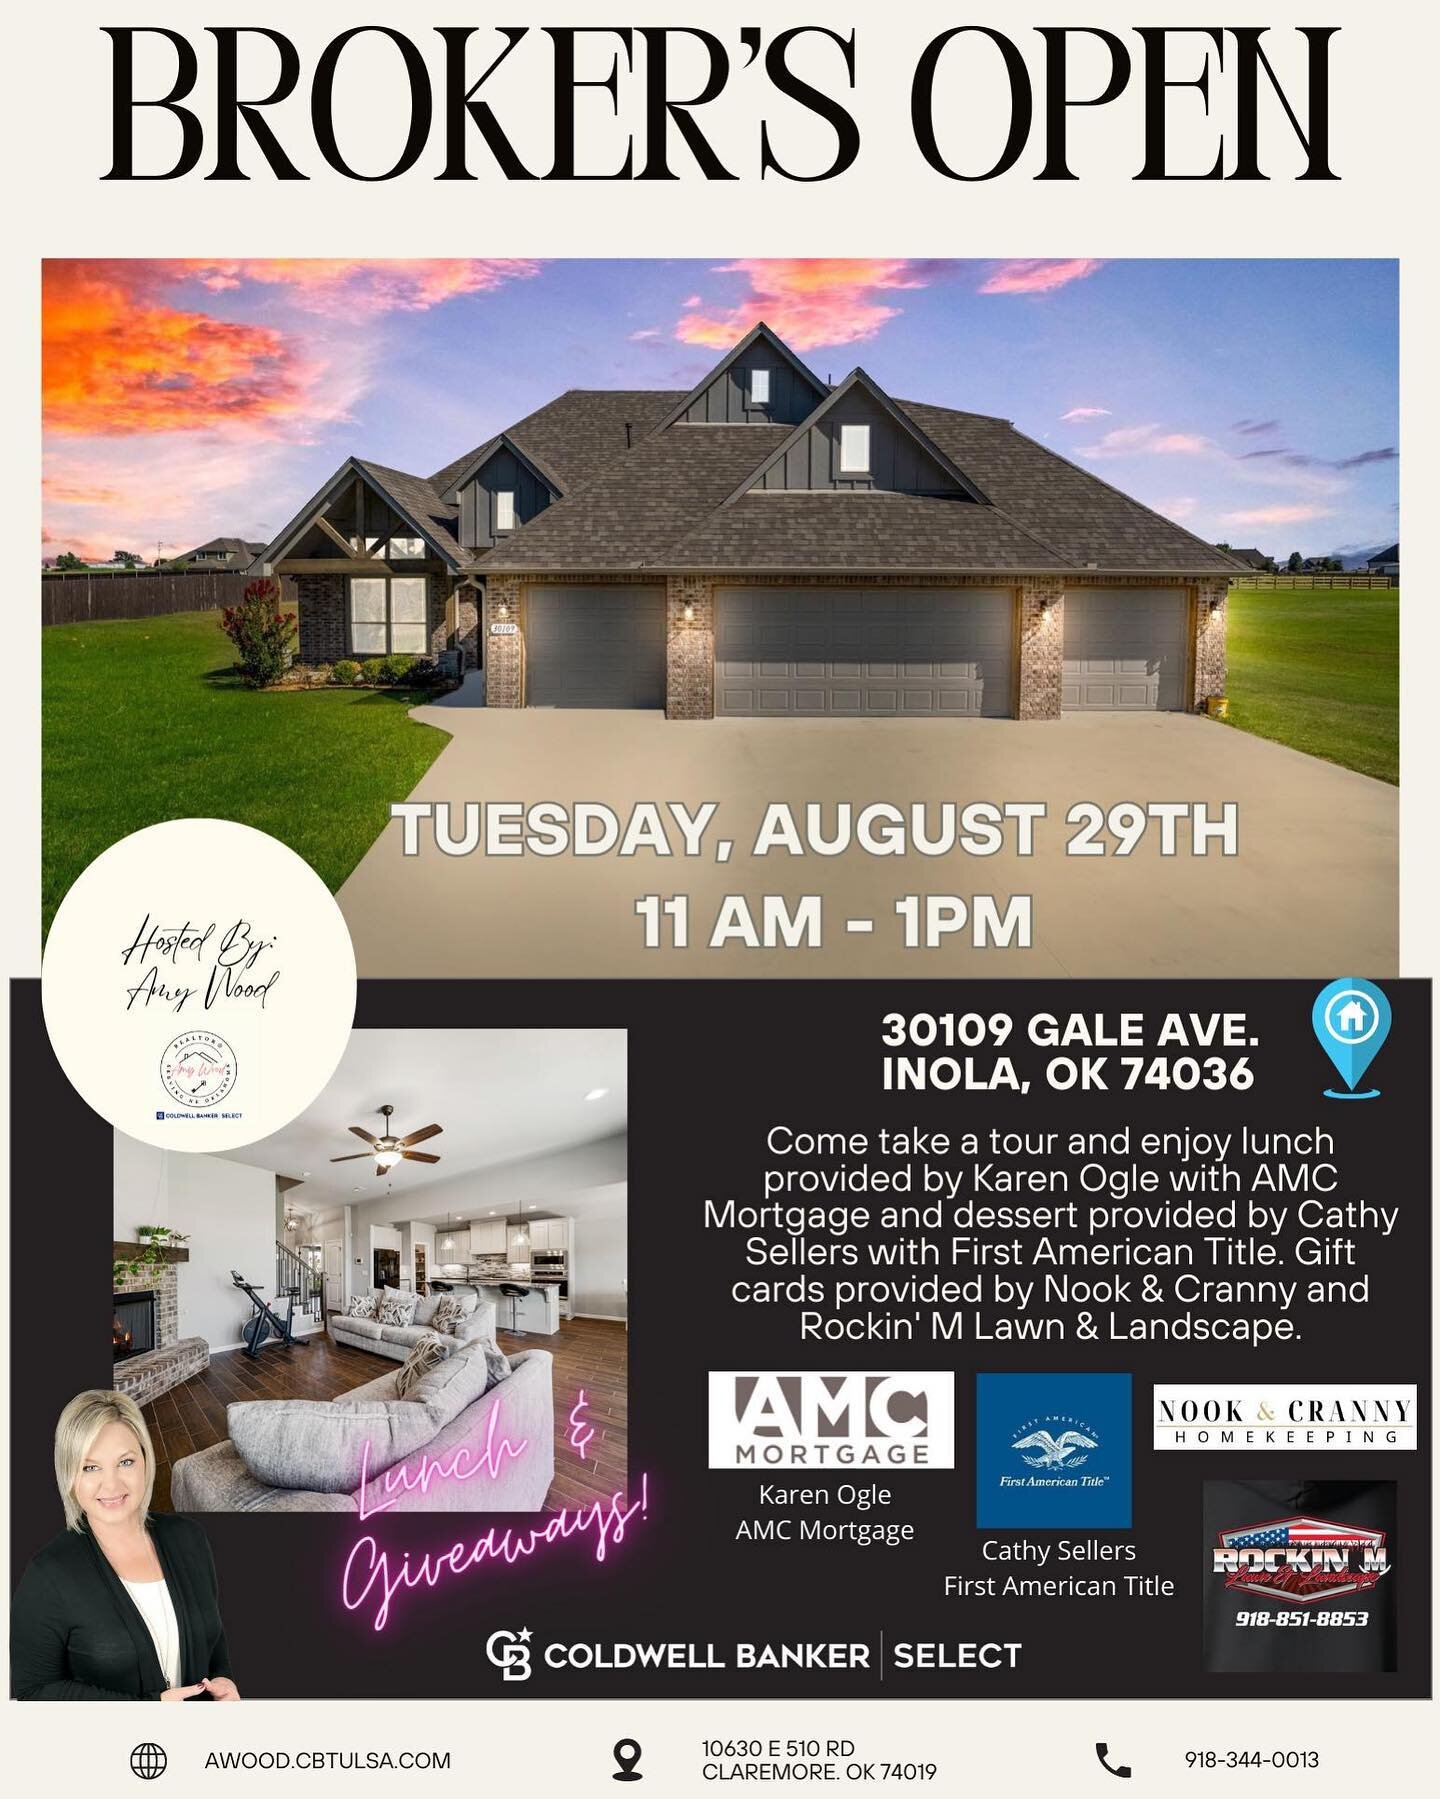 We are excited to be sponsoring a Broker's Open for our friend @amywoodcbselect! Come by Today from 11-1pm to be entered into the gift card drawing!&nbsp;

See the flyer for more info!&nbsp;&nbsp;

#nookhomestulsa #tulsahomes #tulsarealestate #tulsab